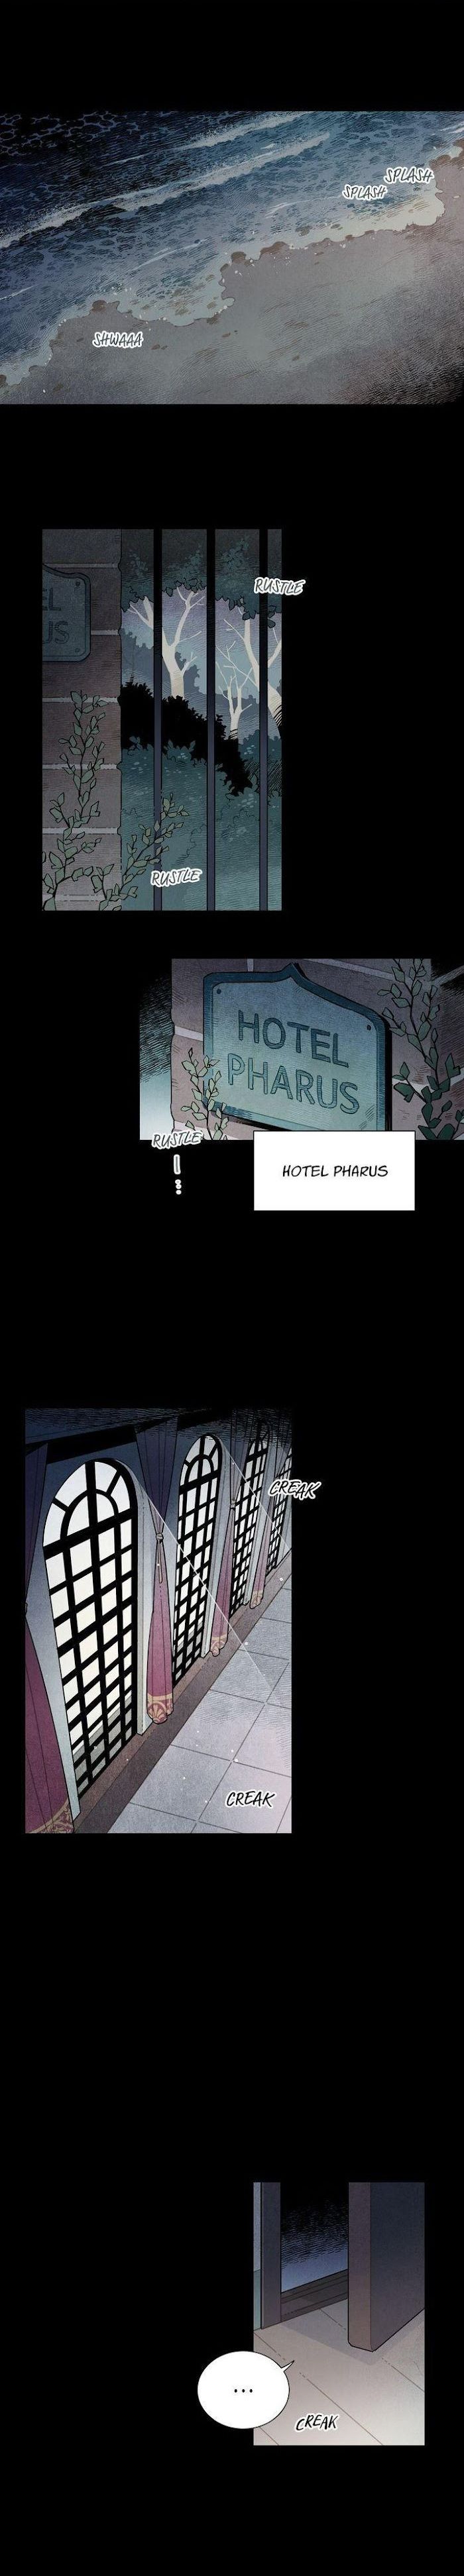 Hotel Pharus - Page 1